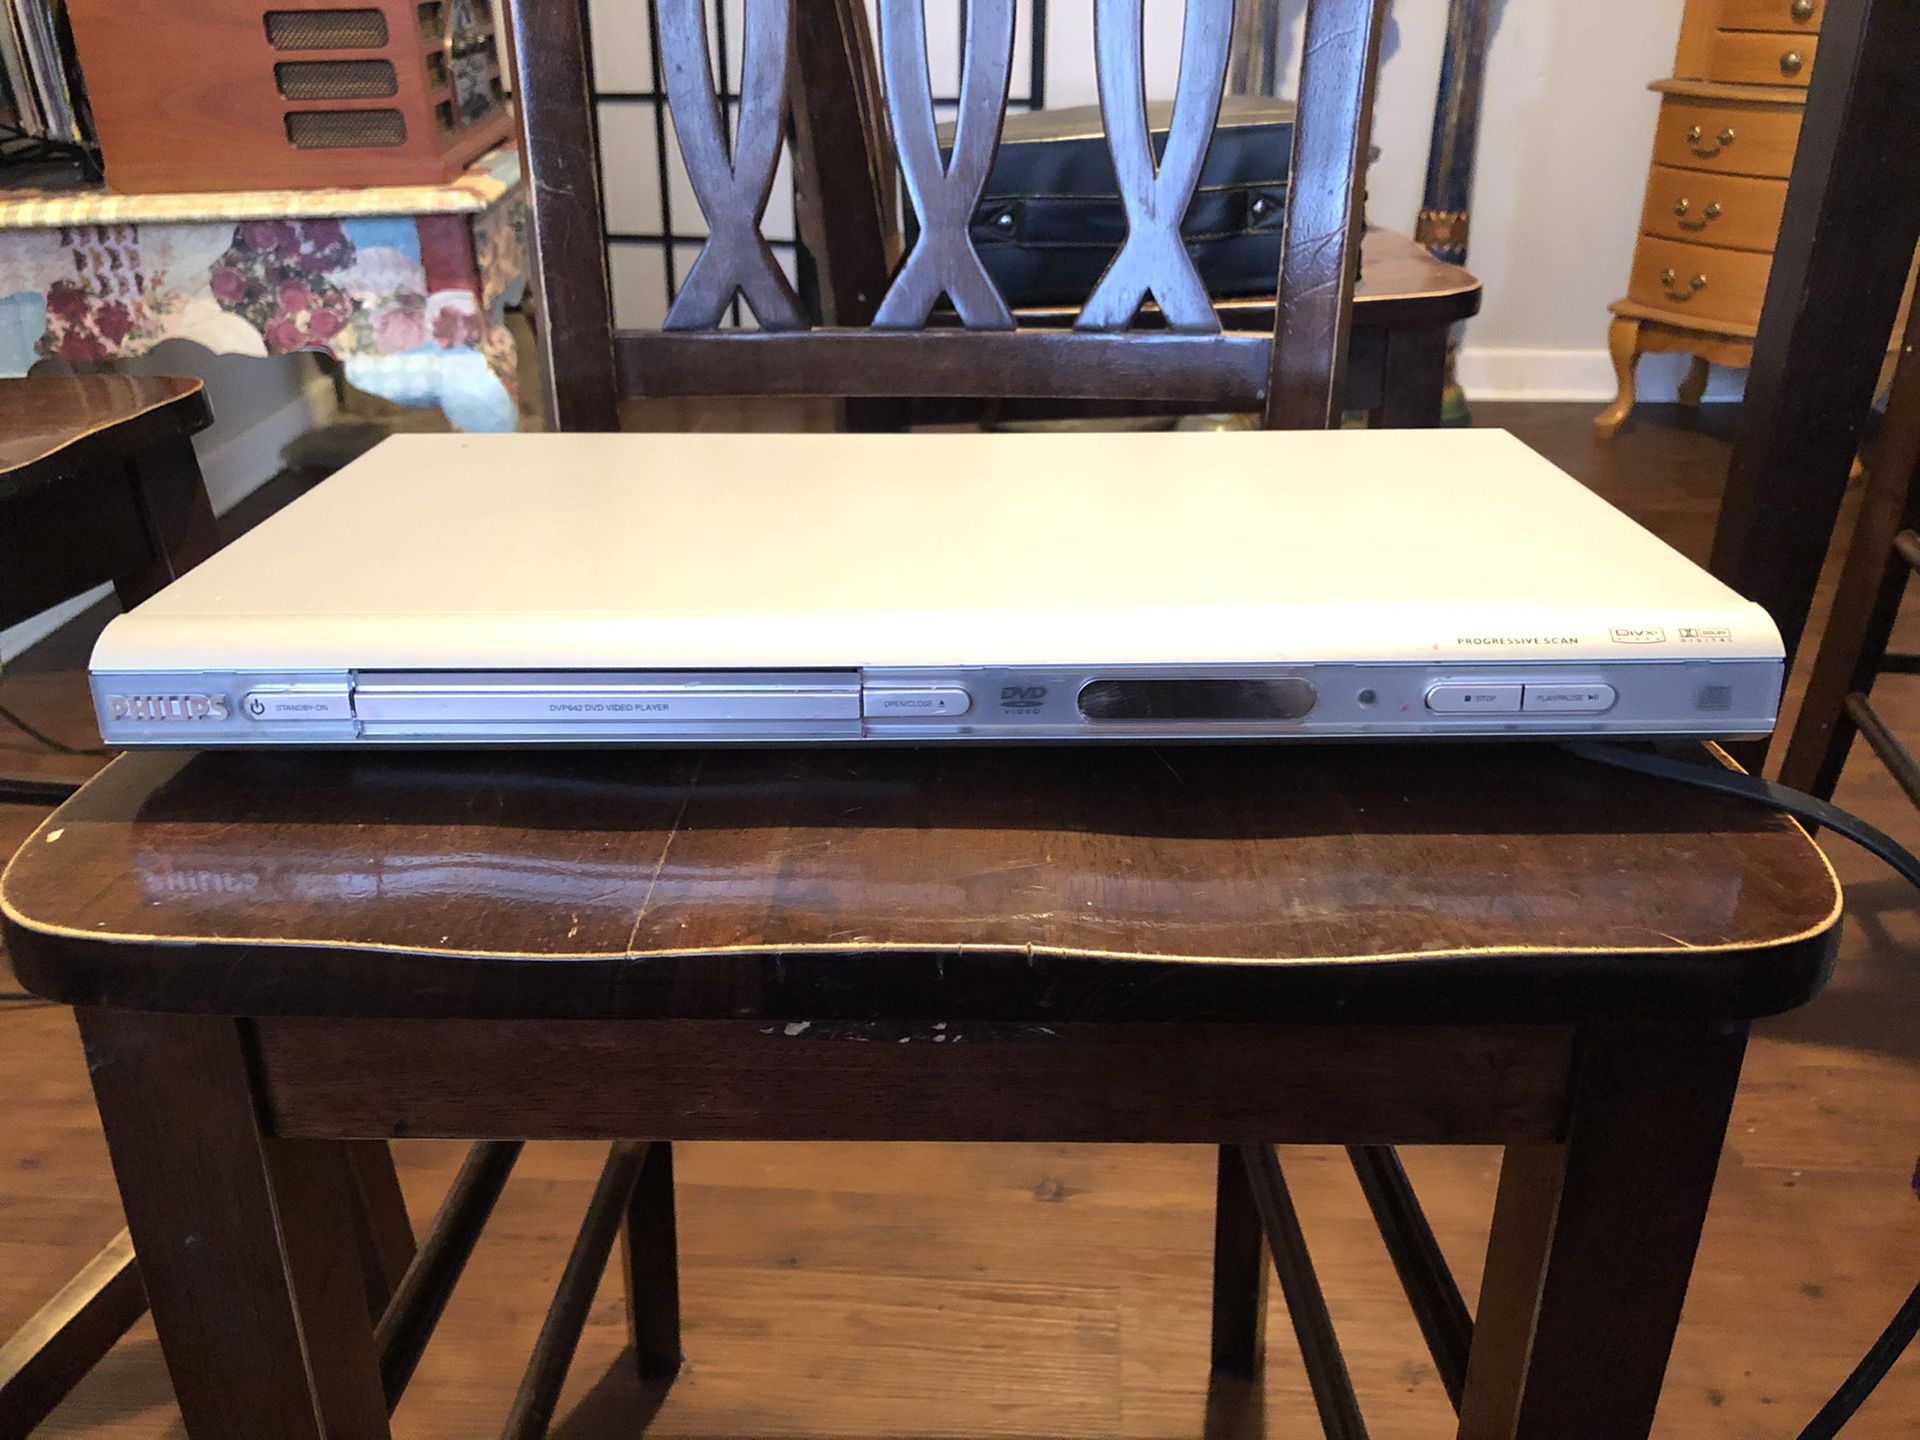 DVD Player with remote and case full of DVDs (about 300)